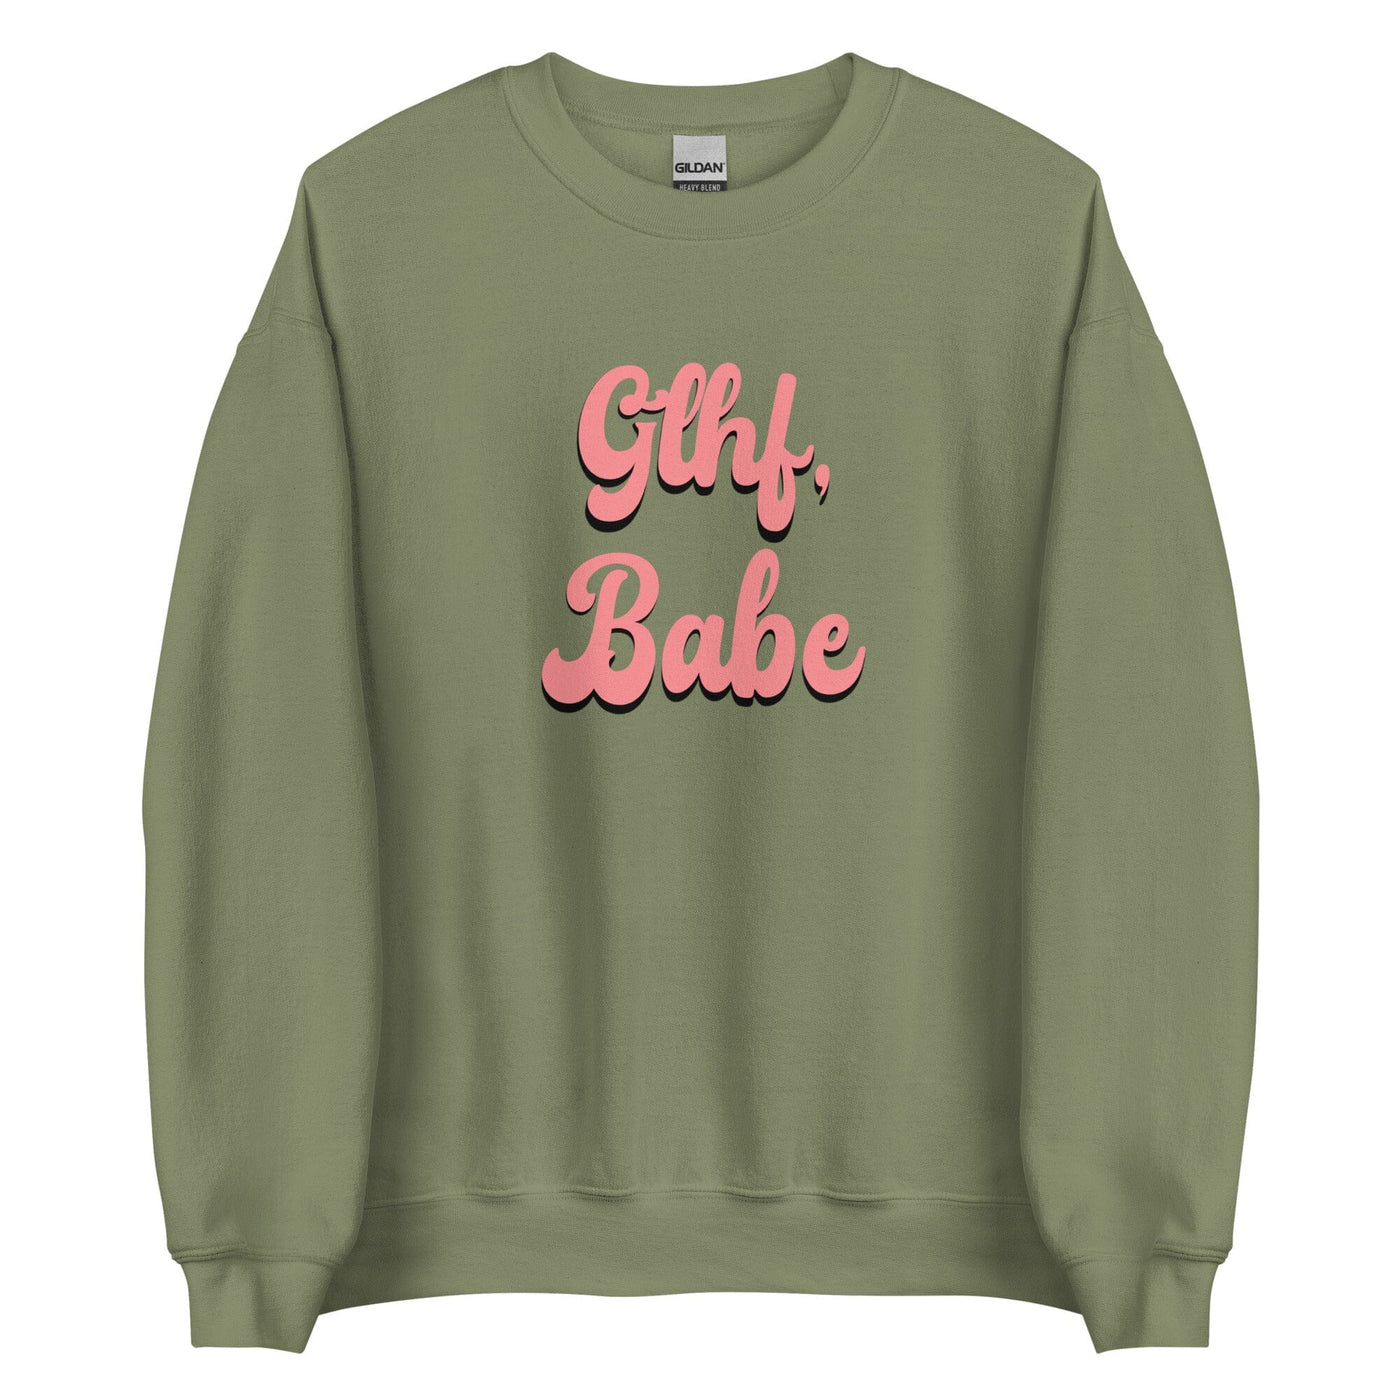 GLHF, Babe | Unisex Sweatshirt | Gamer Affirmations Threads & Thistles Inventory Military Green S 